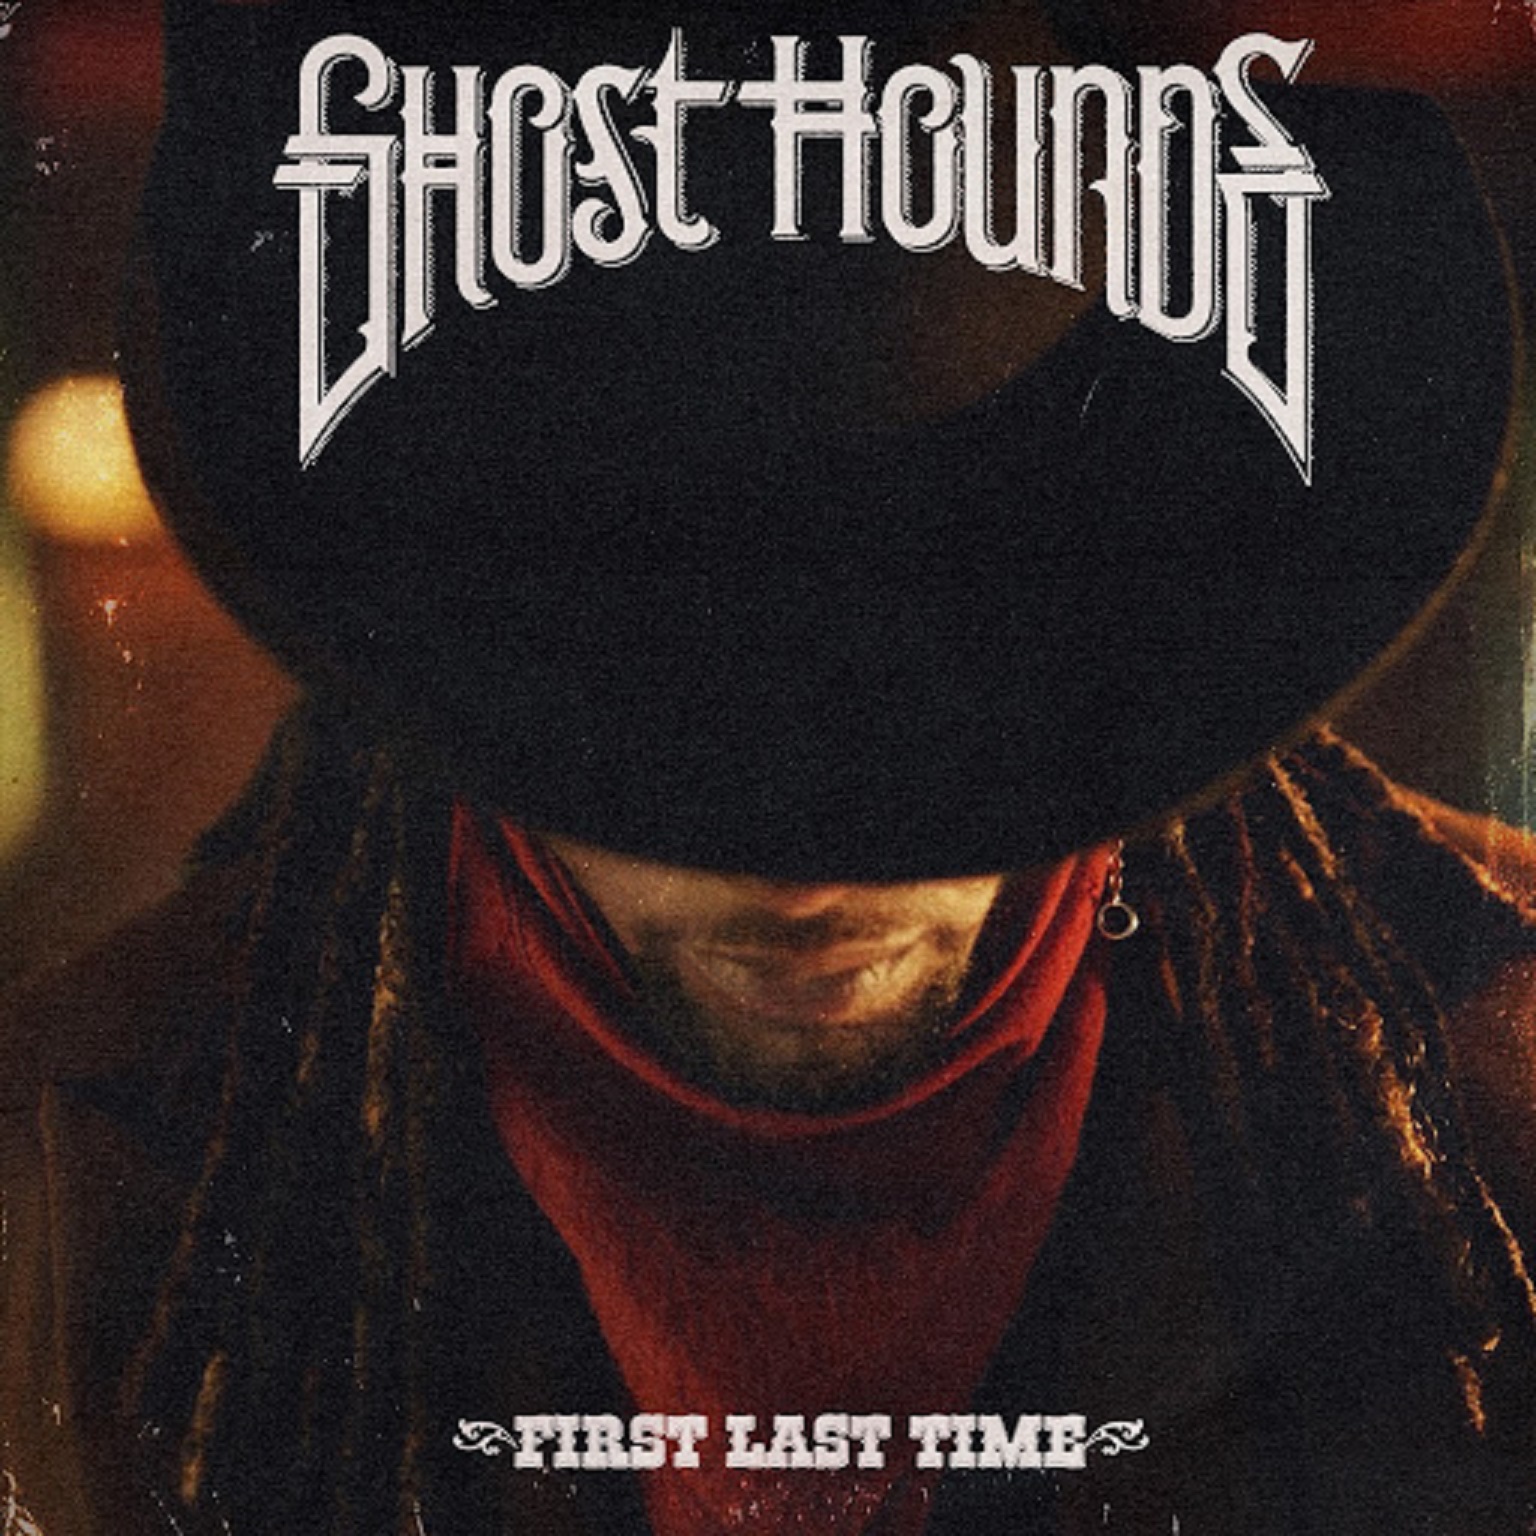 GHOST HOUNDS RELEASE NEW ALBUM VIA GIBSON RECORDS ‘FIRST LAST TIME’